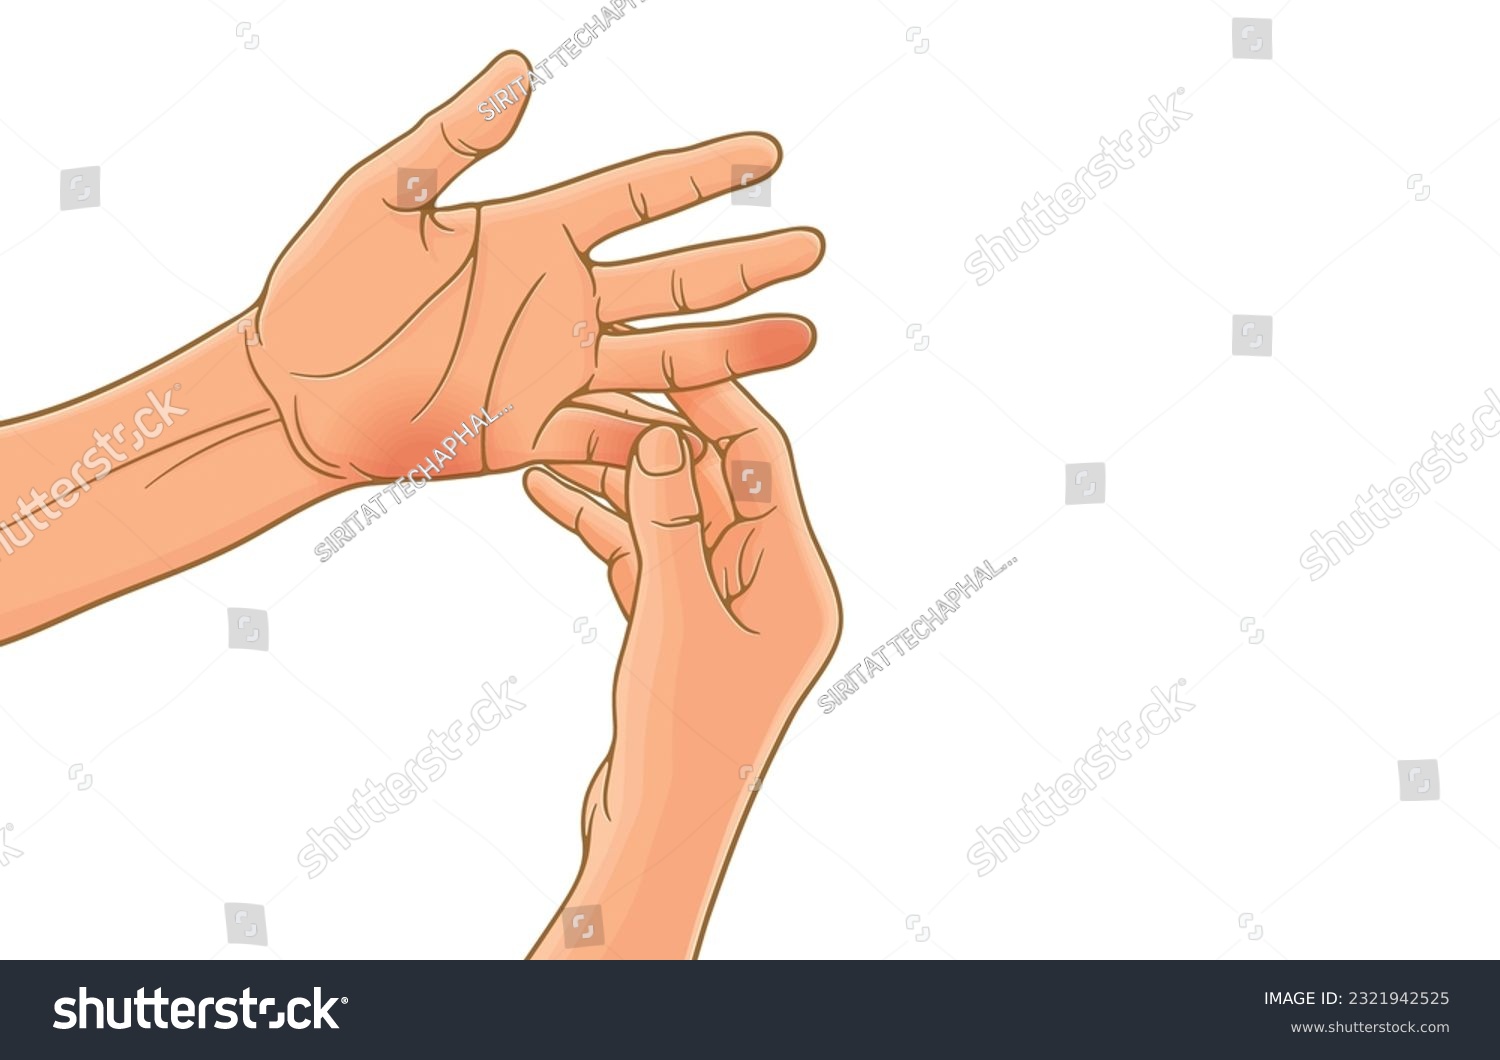 SVG of Vector illustration of hand holding painful tip of pinky finger,ring finger,lower palm,peripheral neuropathy,raynaud’s disease,ulnar tunnel syndrome,office syndrome,isolated on white.Good hand health. svg